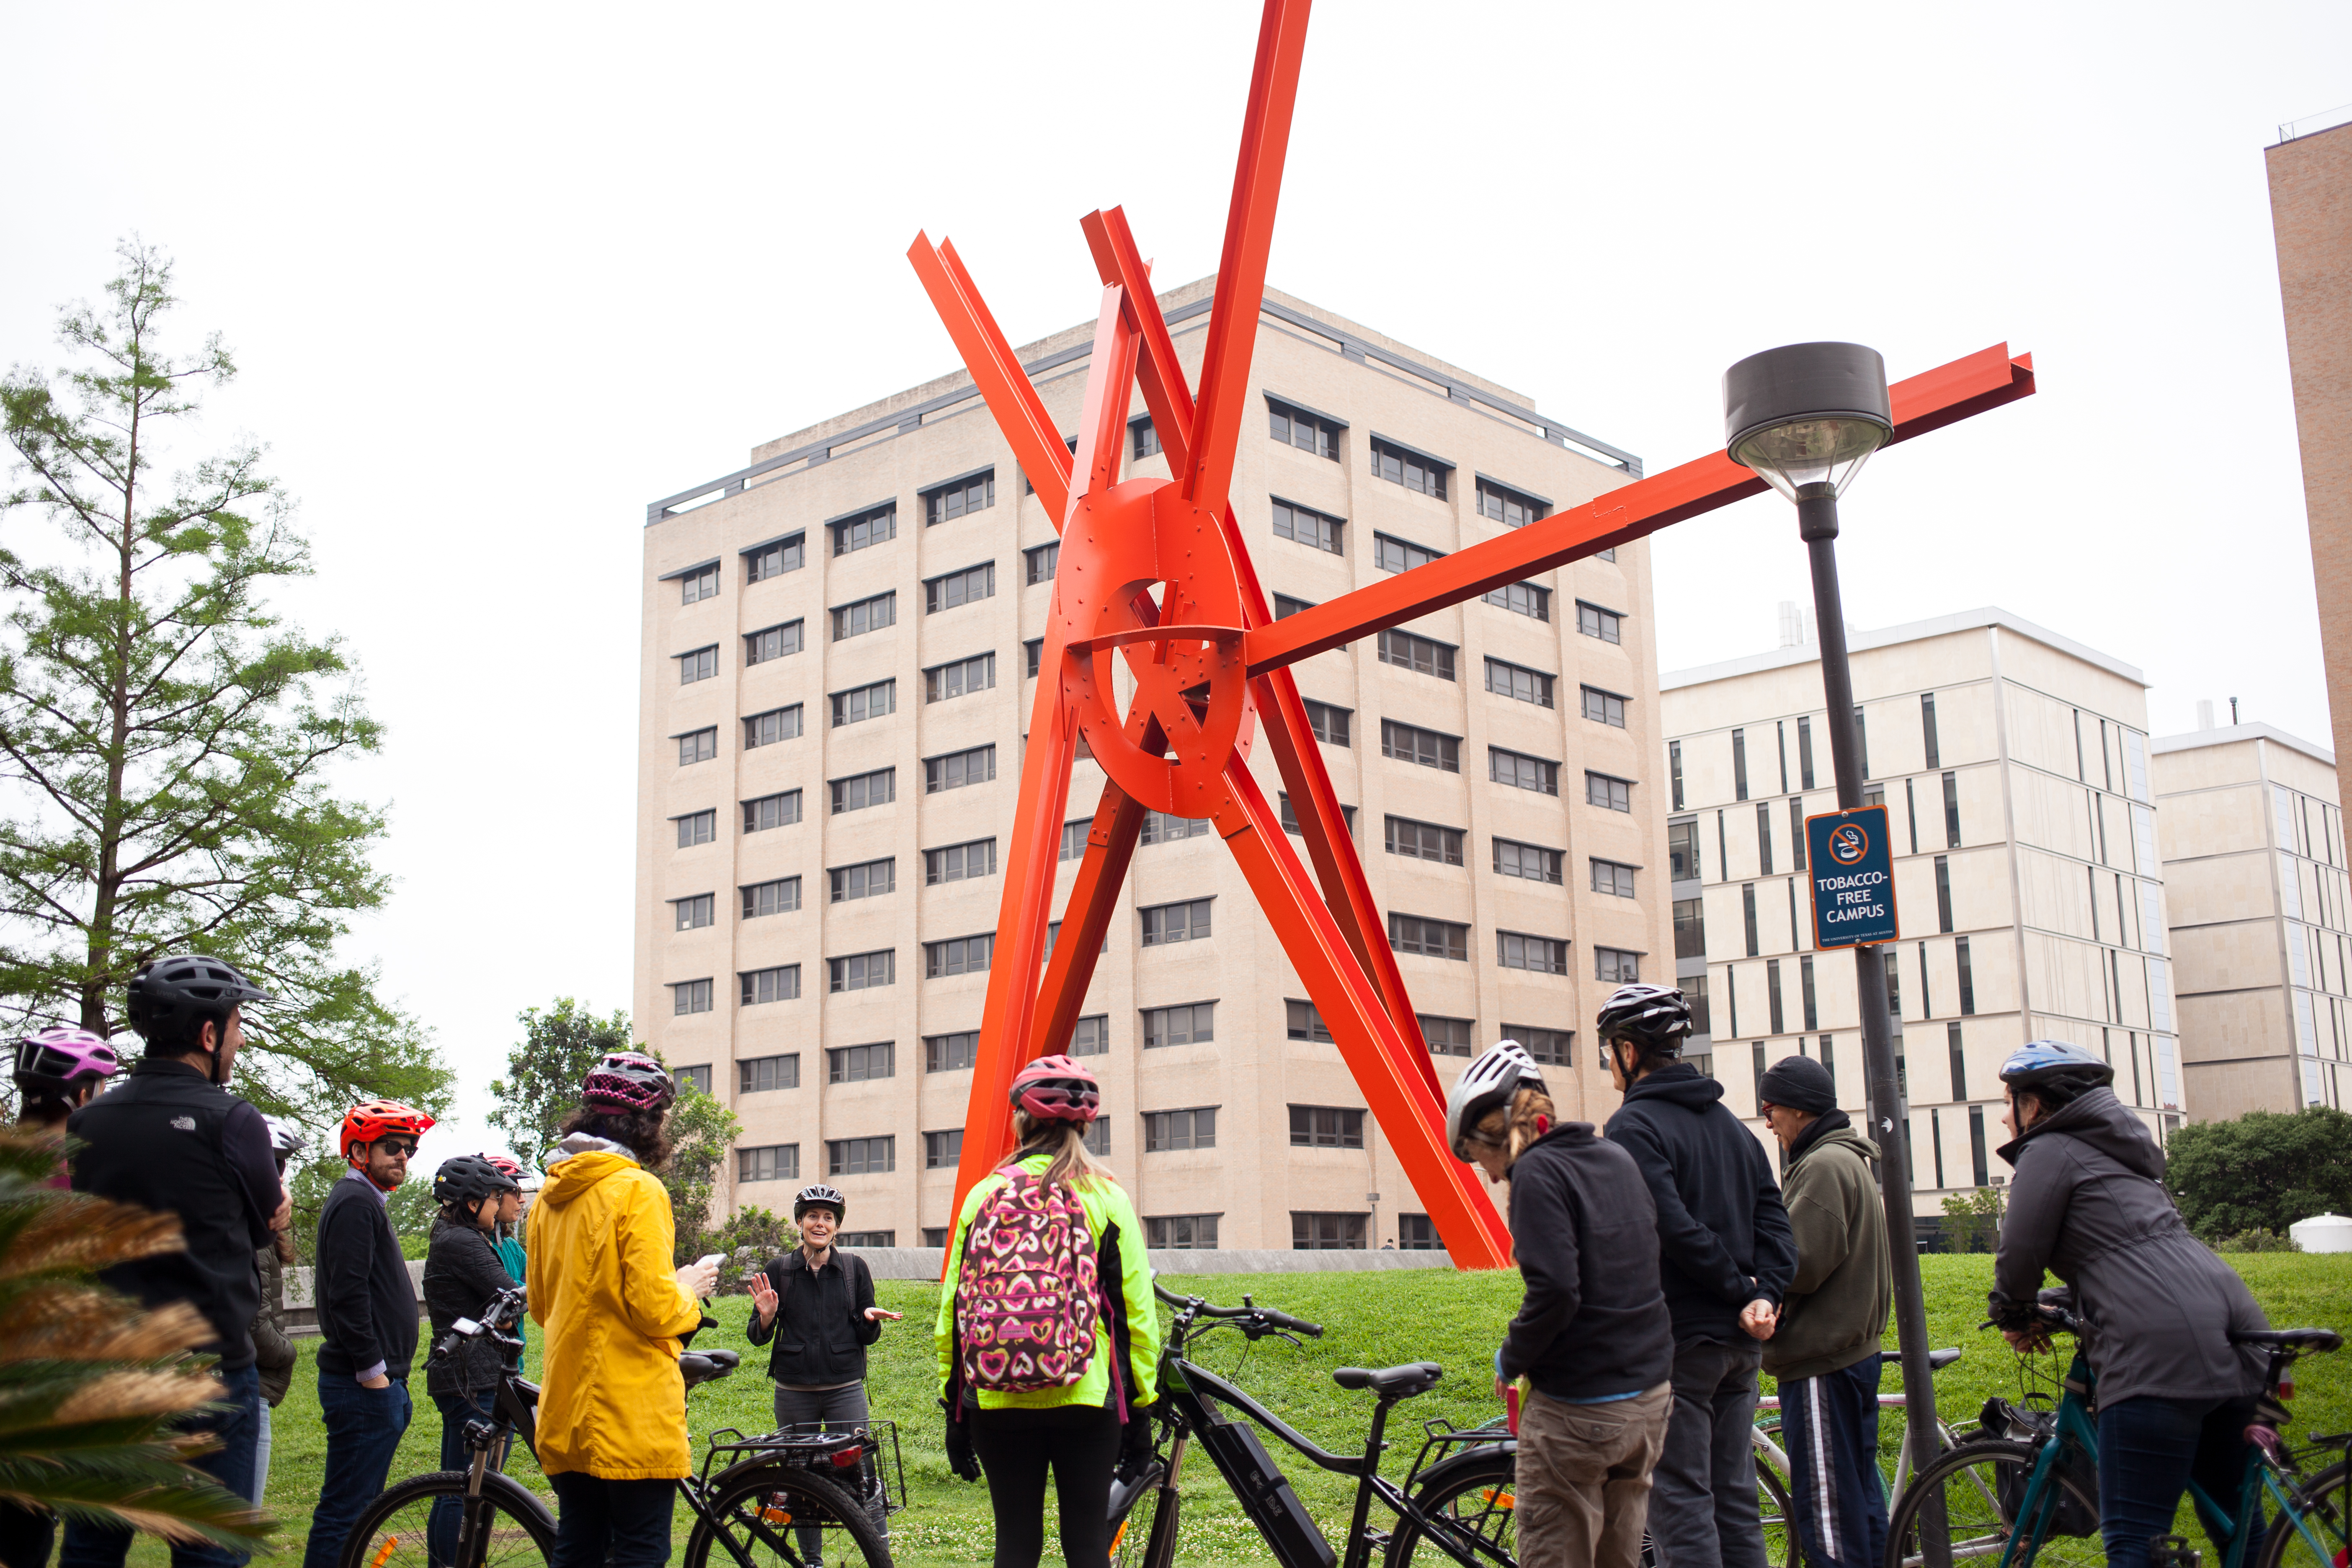 Image of bike tour participants looking at "Clock Knot" by Mark Di Suvero